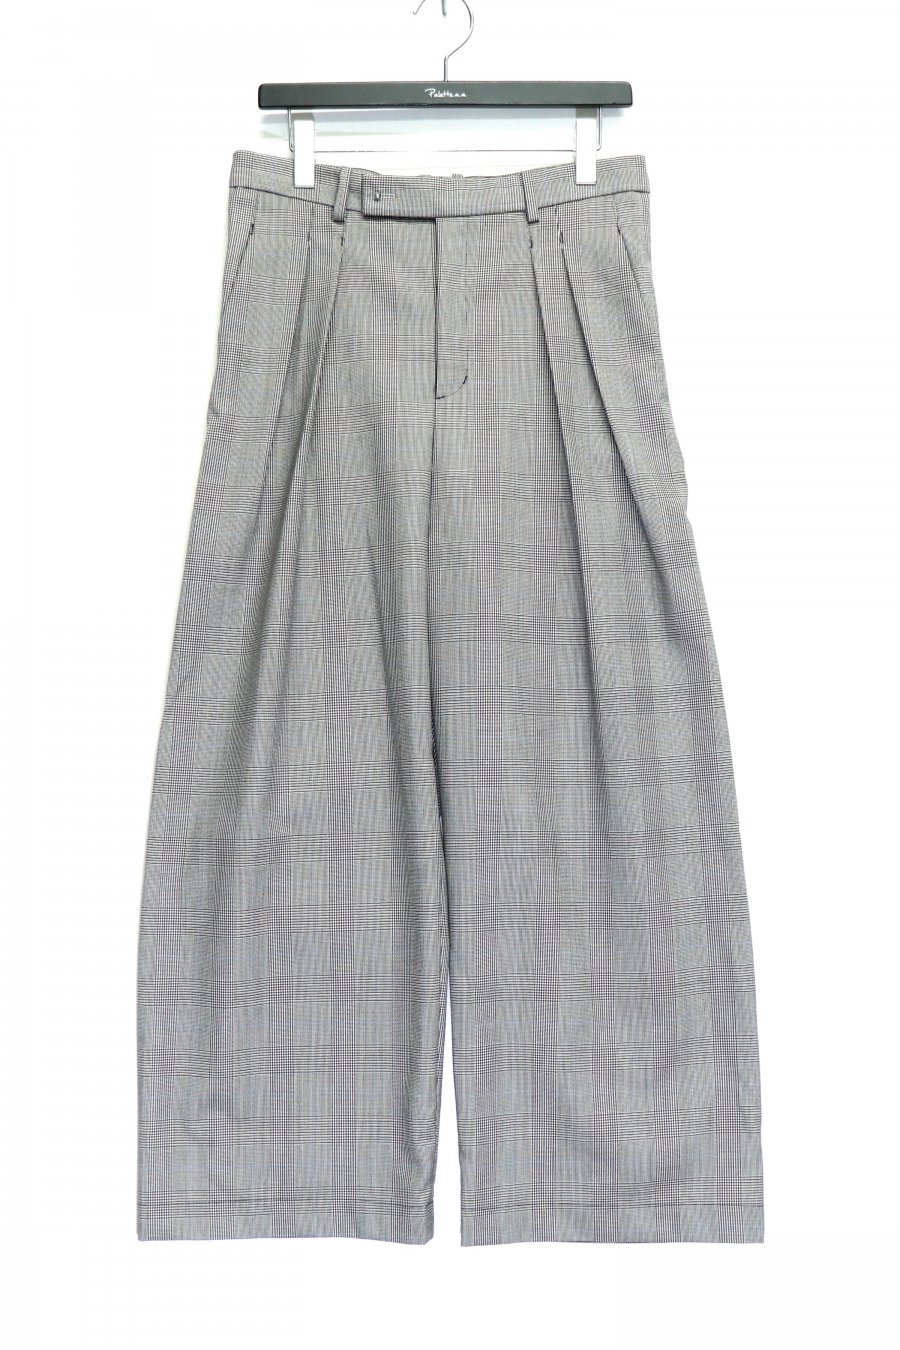 【30%OFF】KONYA  Tucked Wide Pants(CHECK)<img class='new_mark_img2' src='https://img.shop-pro.jp/img/new/icons20.gif' style='border:none;display:inline;margin:0px;padding:0px;width:auto;' />